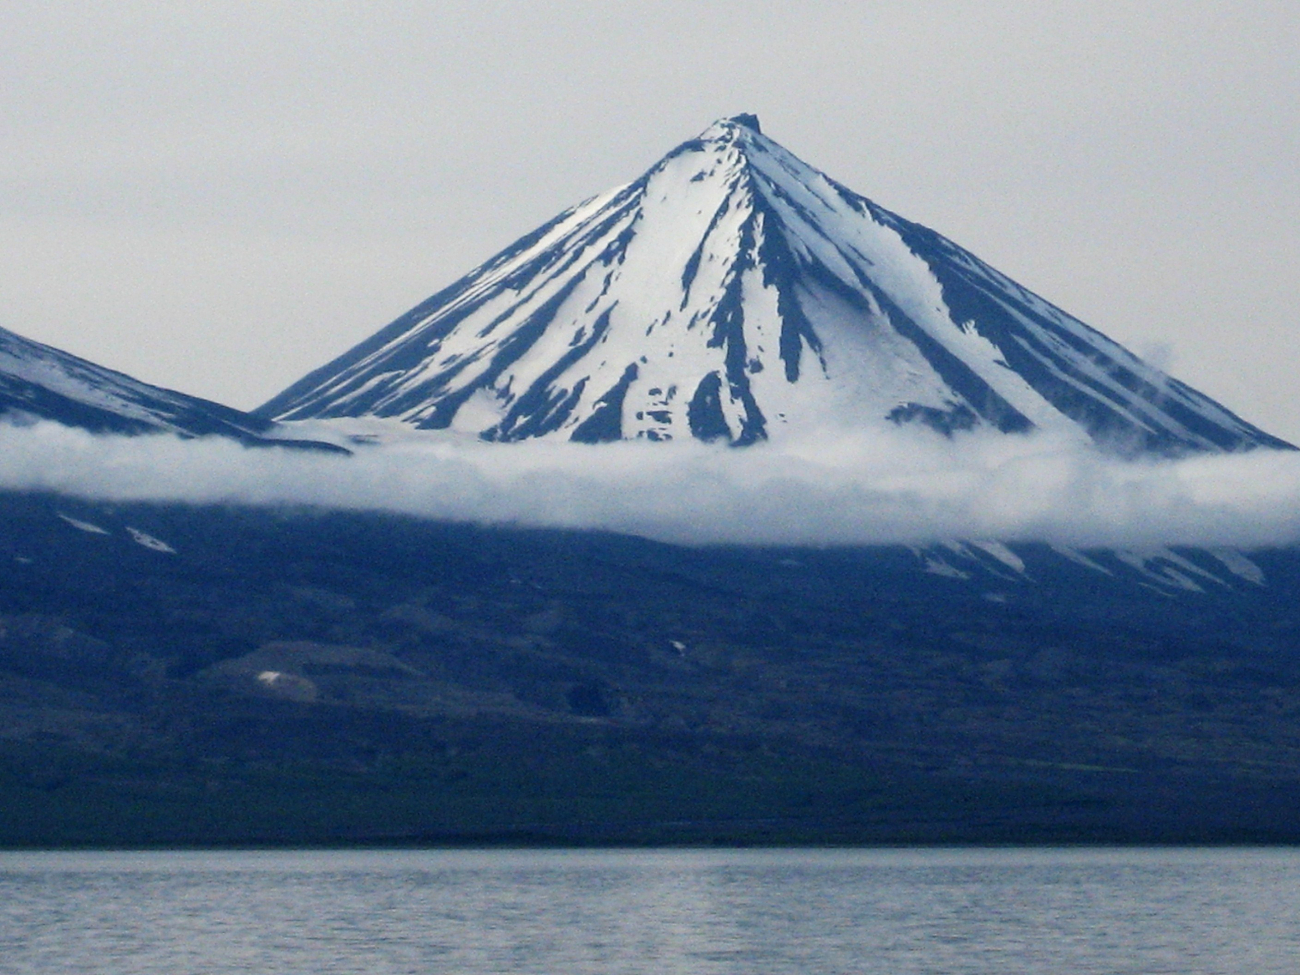 Pavlof Sister Volcano as seen from the Cold Bay area